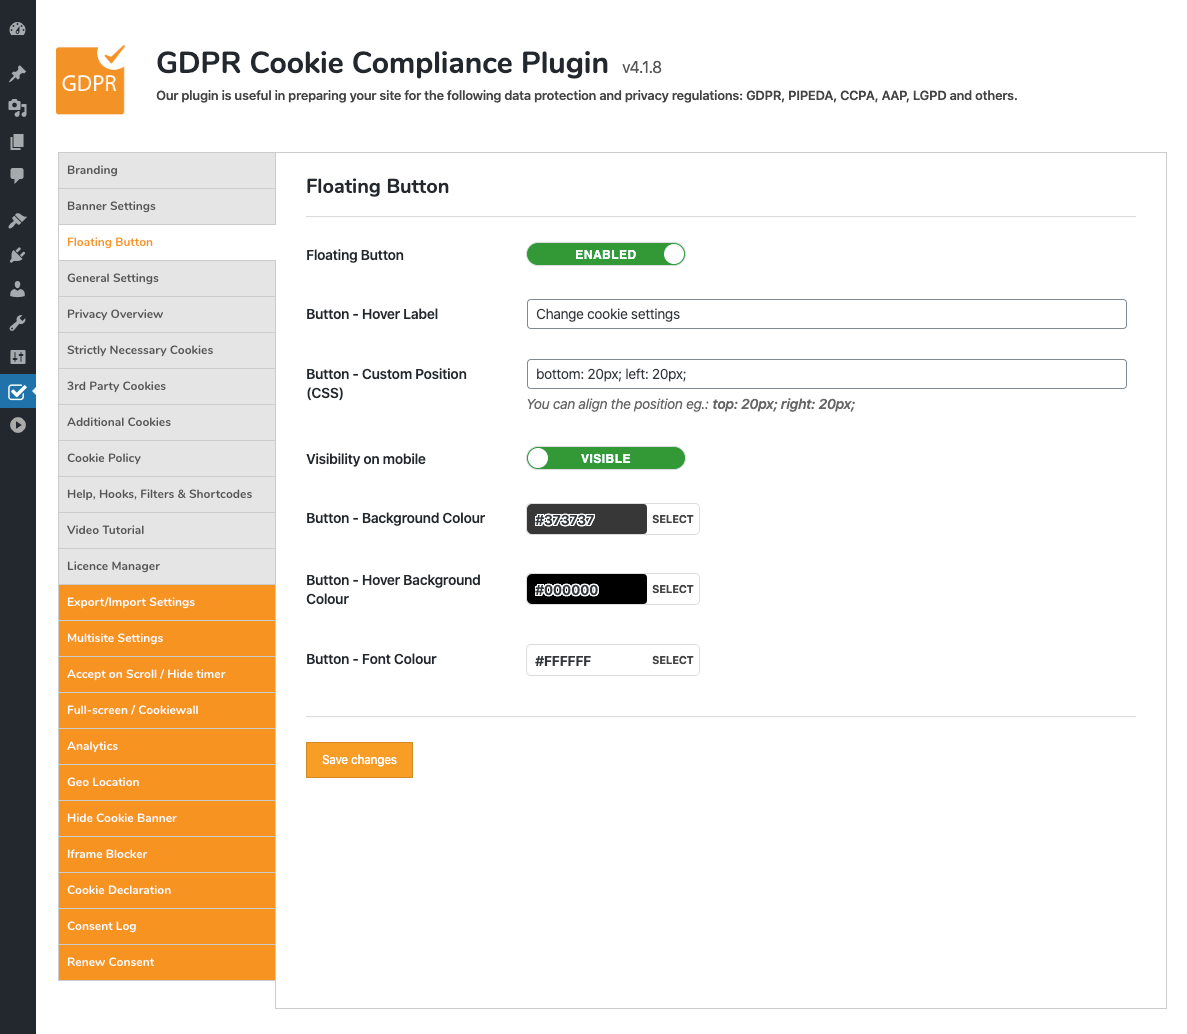 GDPR Cookie Compliance - Front-end - Cookie Consent Banner